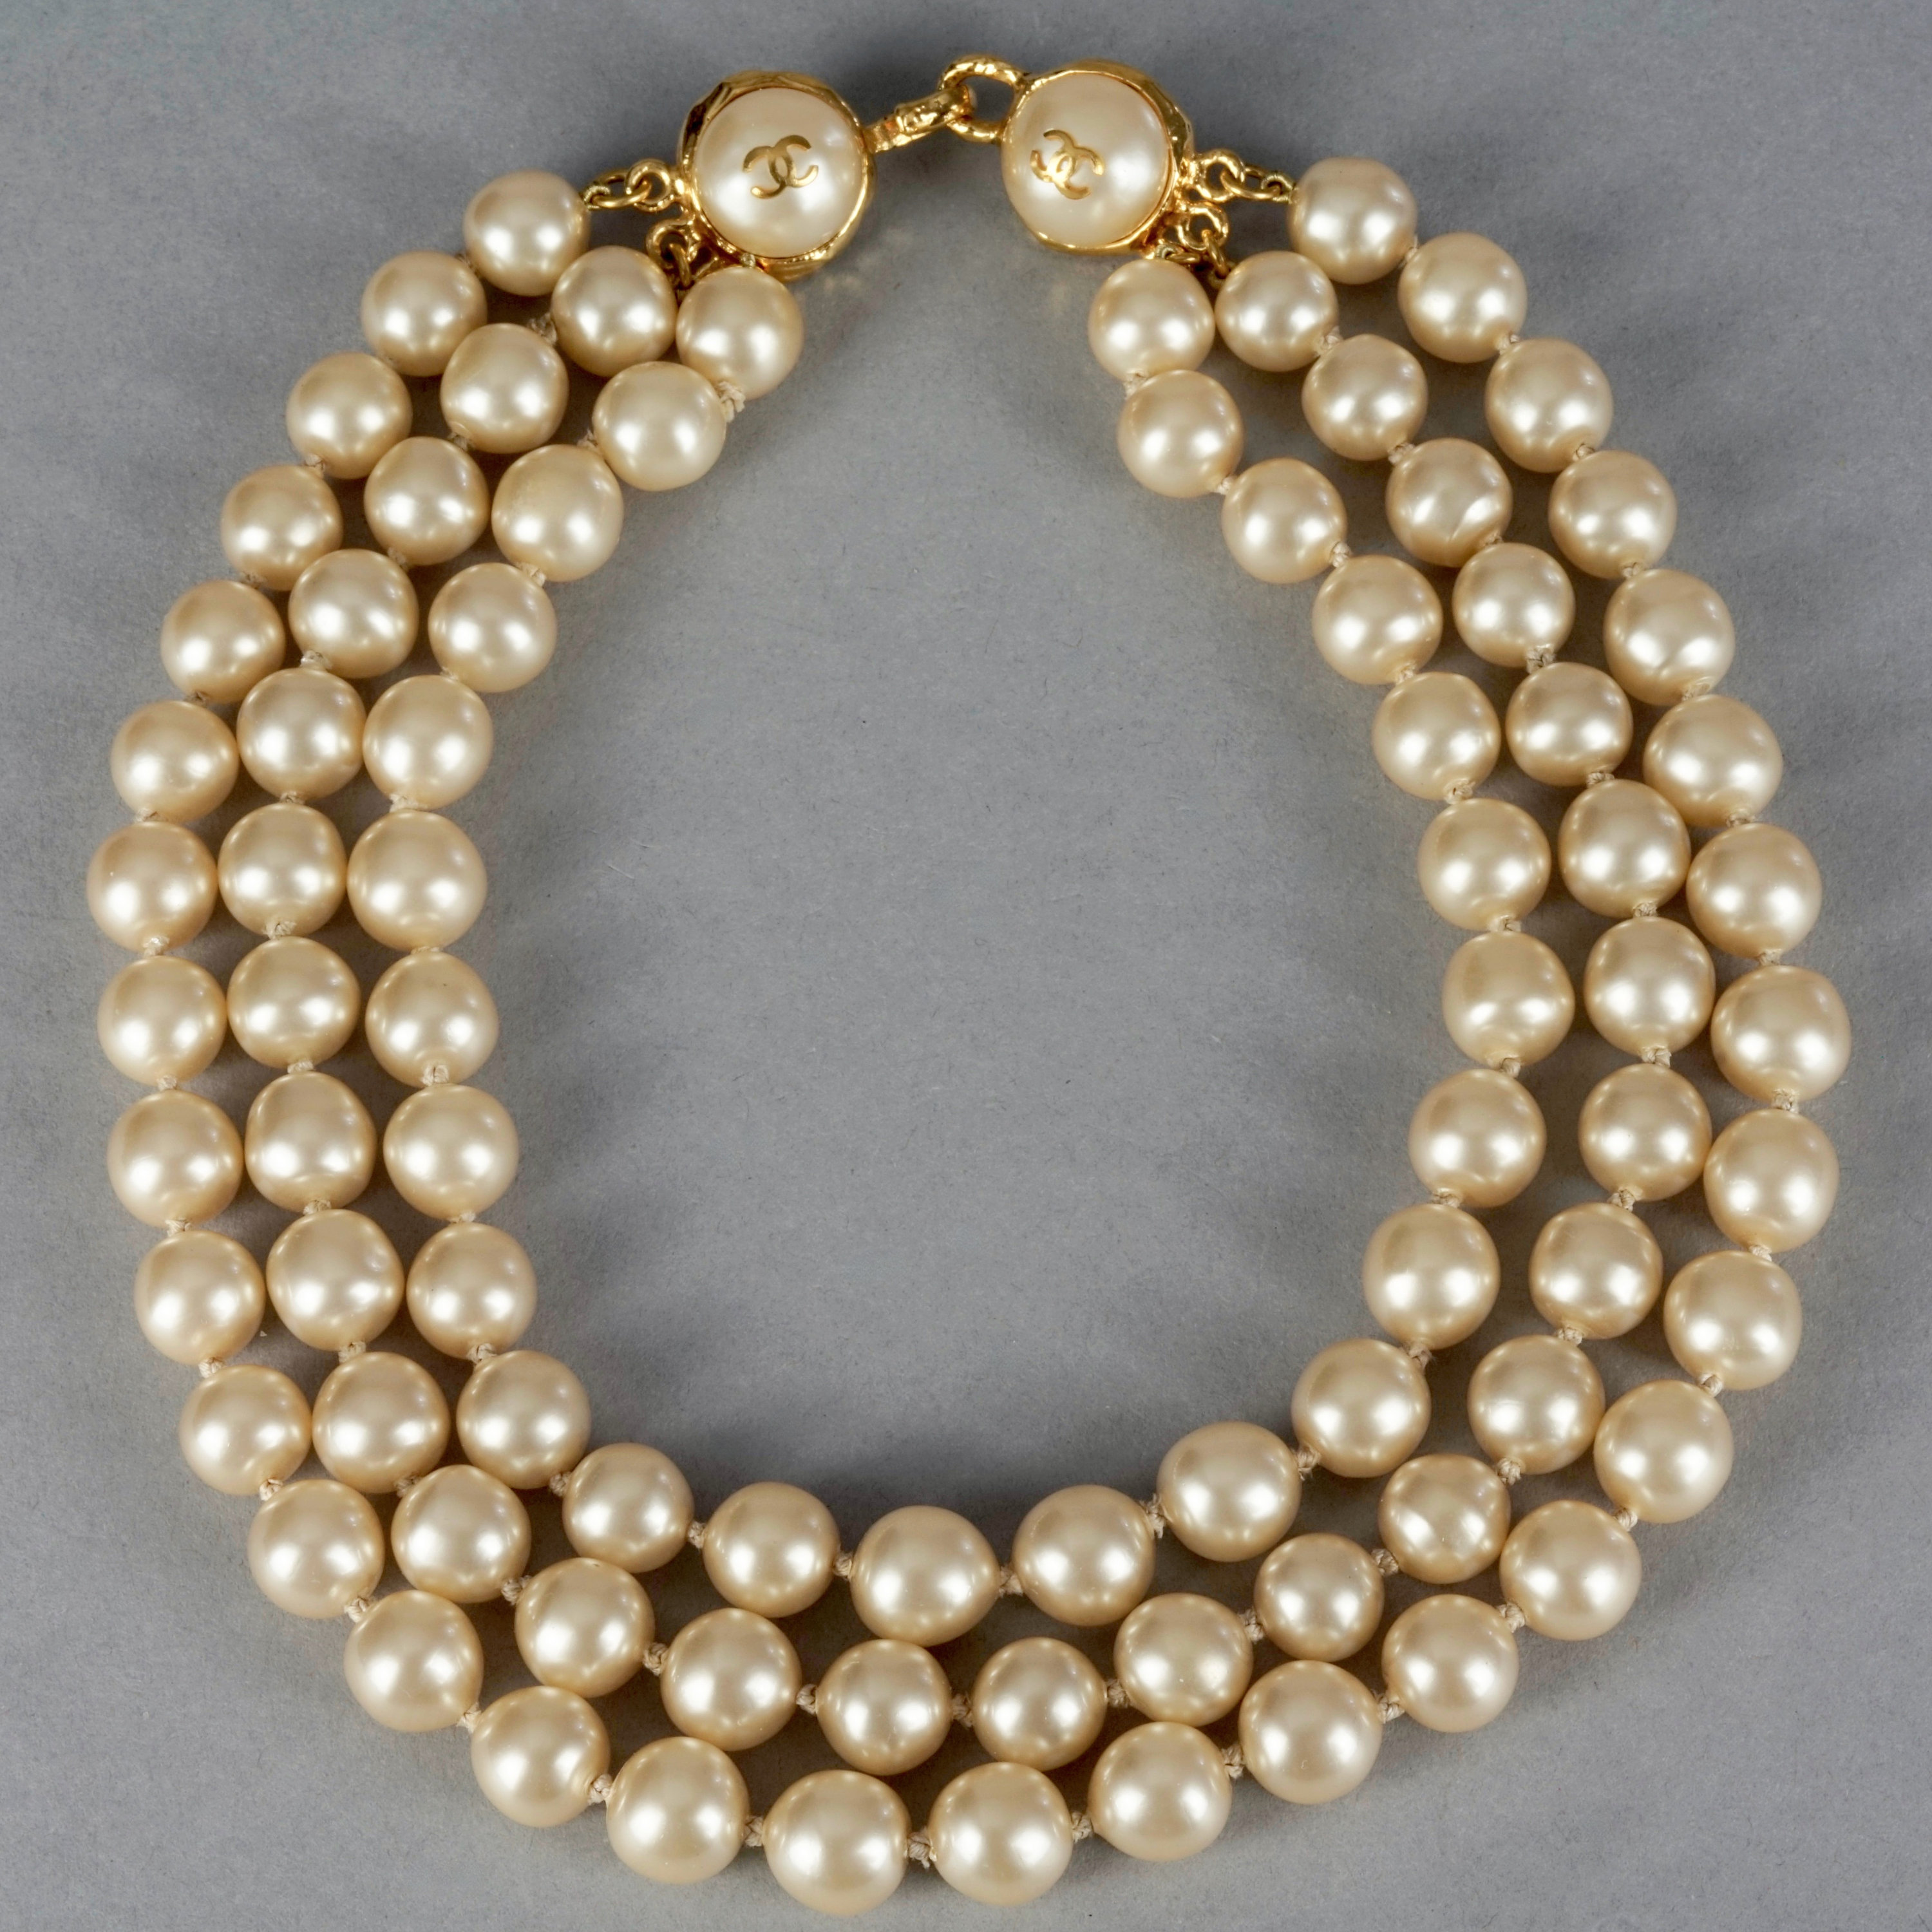 Chanel Beige Cross Stone Bead Pearl 3 Strand Necklace 100 Yr Anniversary